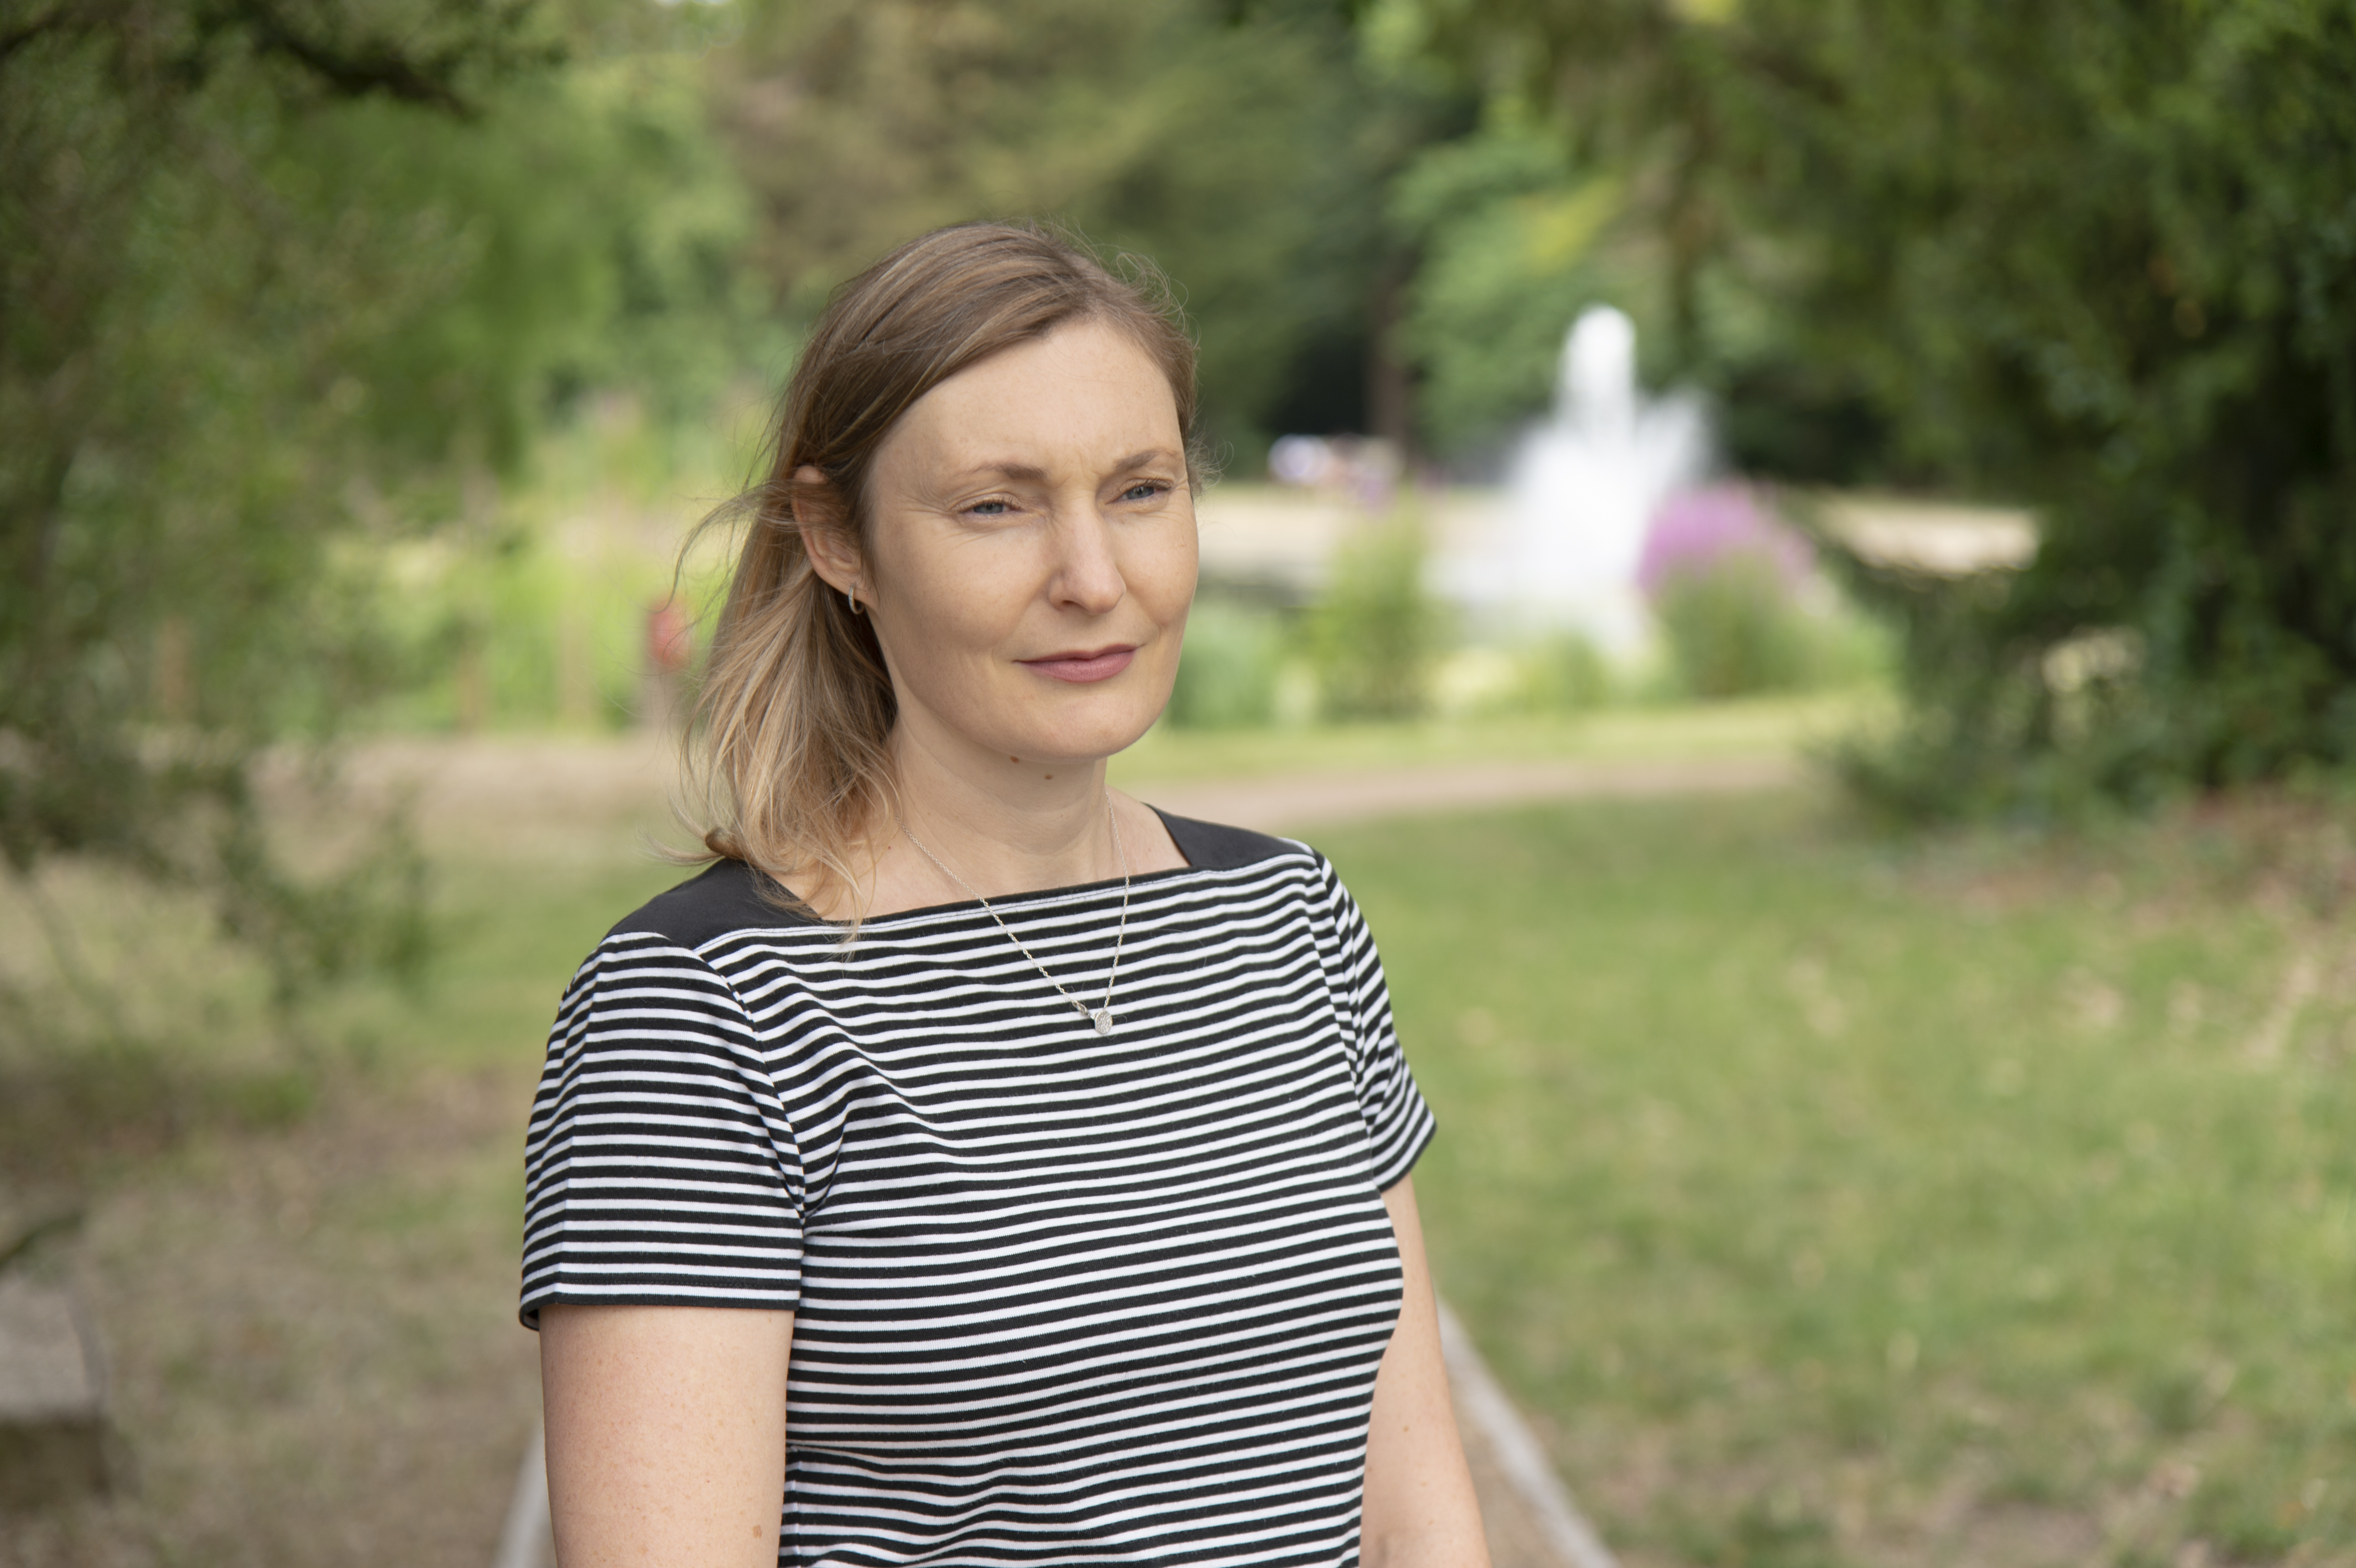 a lady stands in a park in a striped top